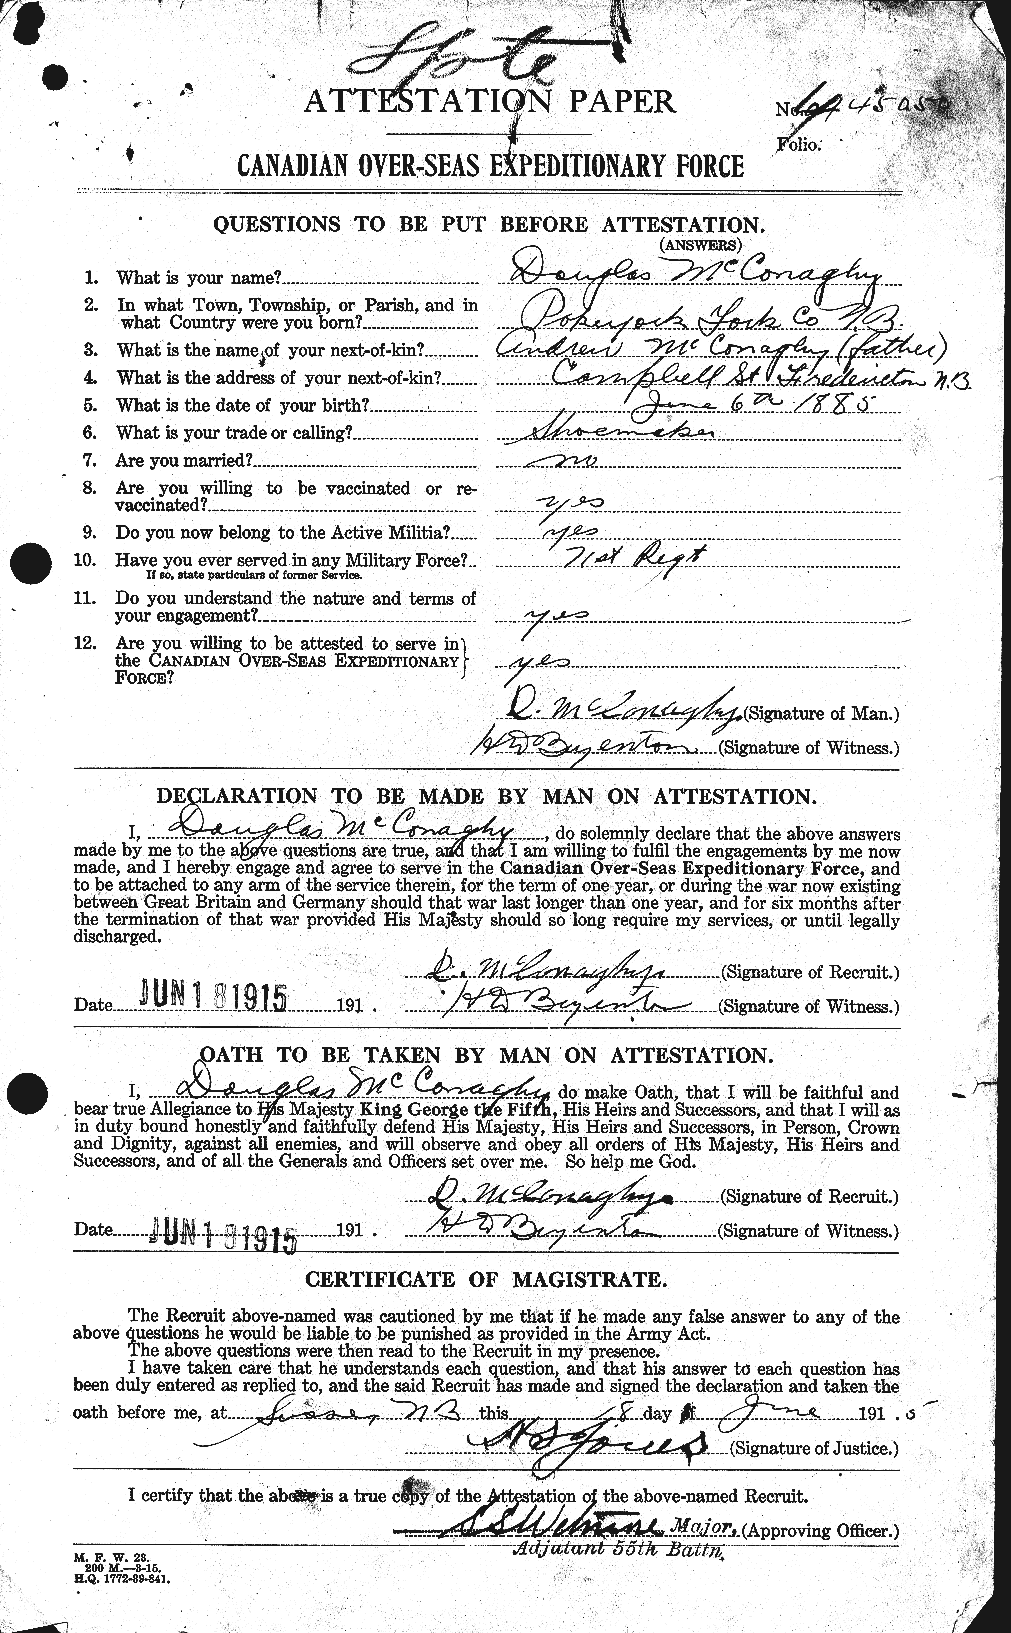 Personnel Records of the First World War - CEF 133035a